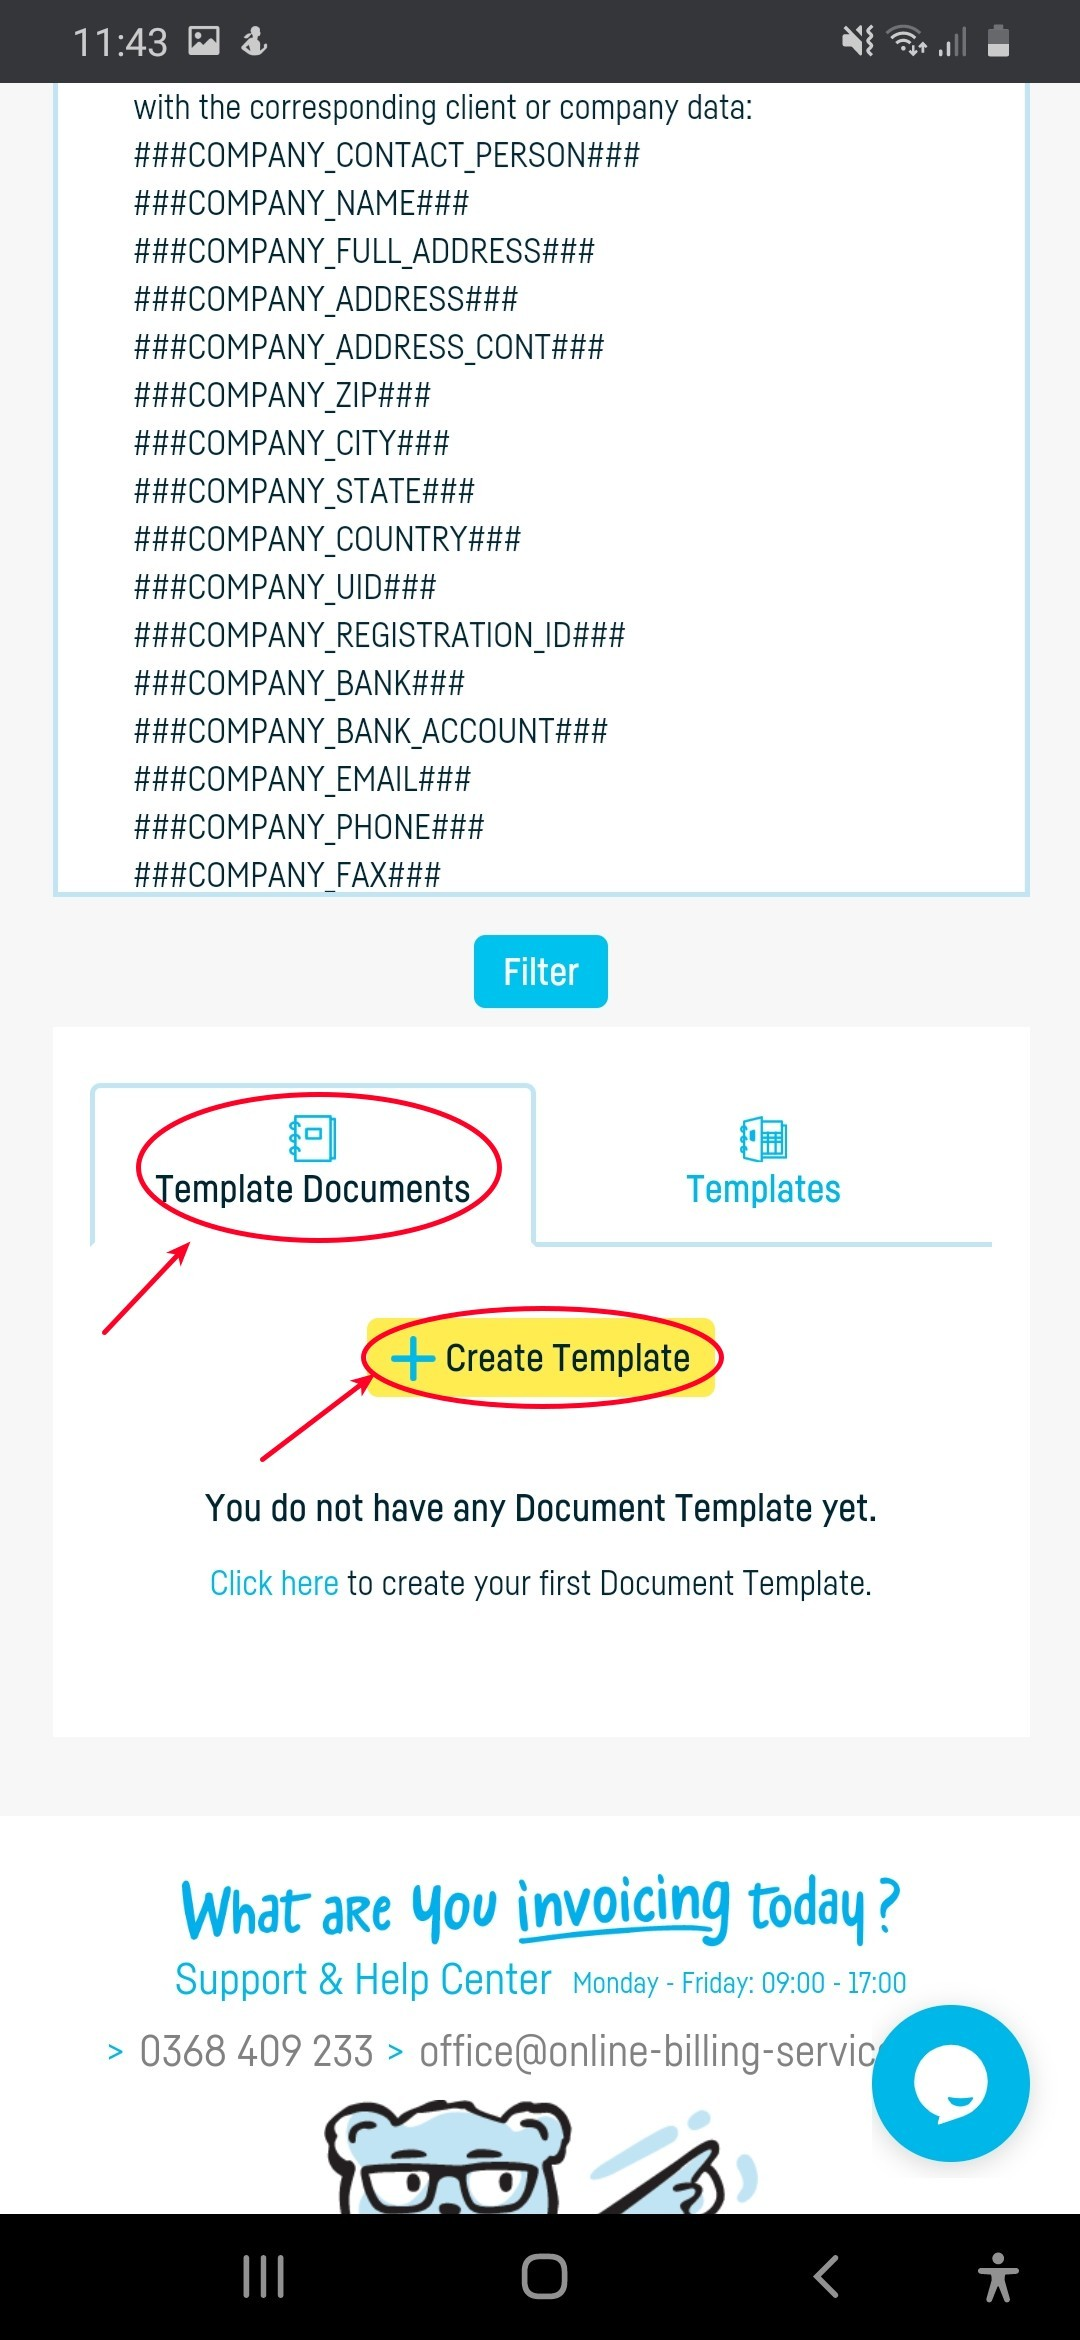 Generate a document from a standard document template - step 3